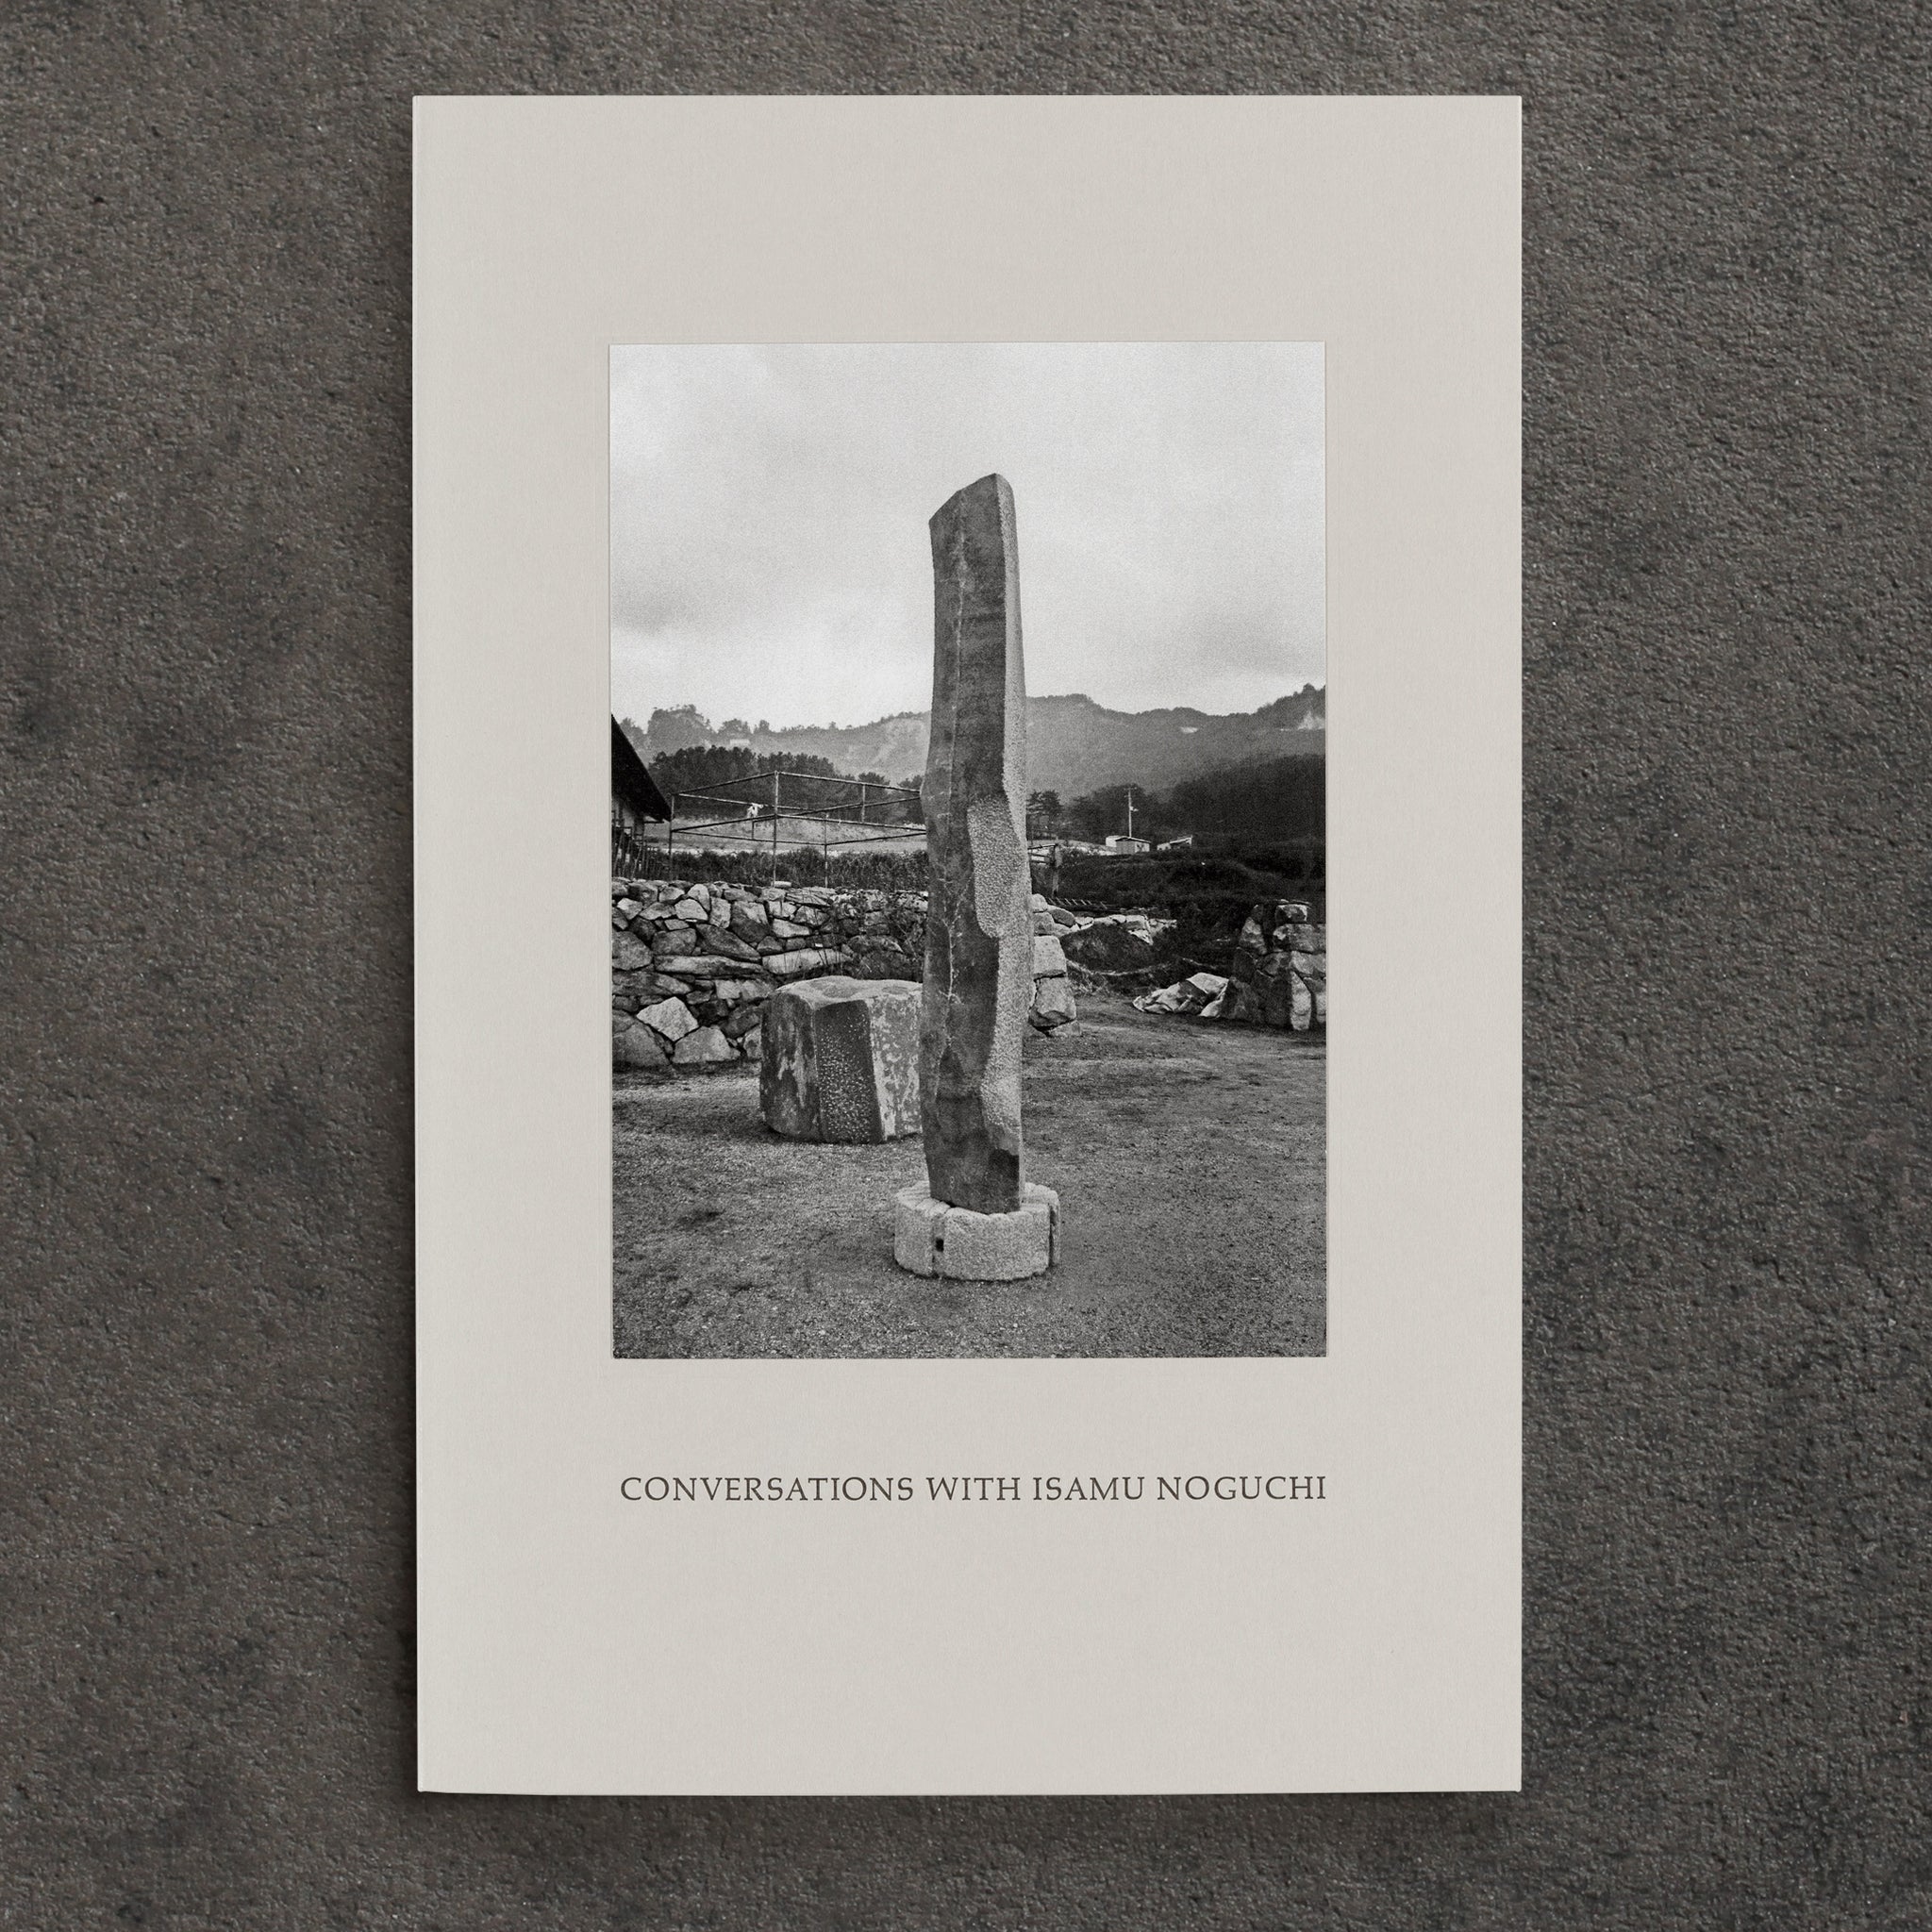 Conversations with Isamu Noguchi, front cover. Grey book cover with black and white photograph of view of Isamu Noguchi’s To Tallness and sculptures in progress at his studio in Mure, surrounded by mountains. The title "Conversations with Isamu Noguchi" is in Palatino Caps below the image, printed letterpress. 